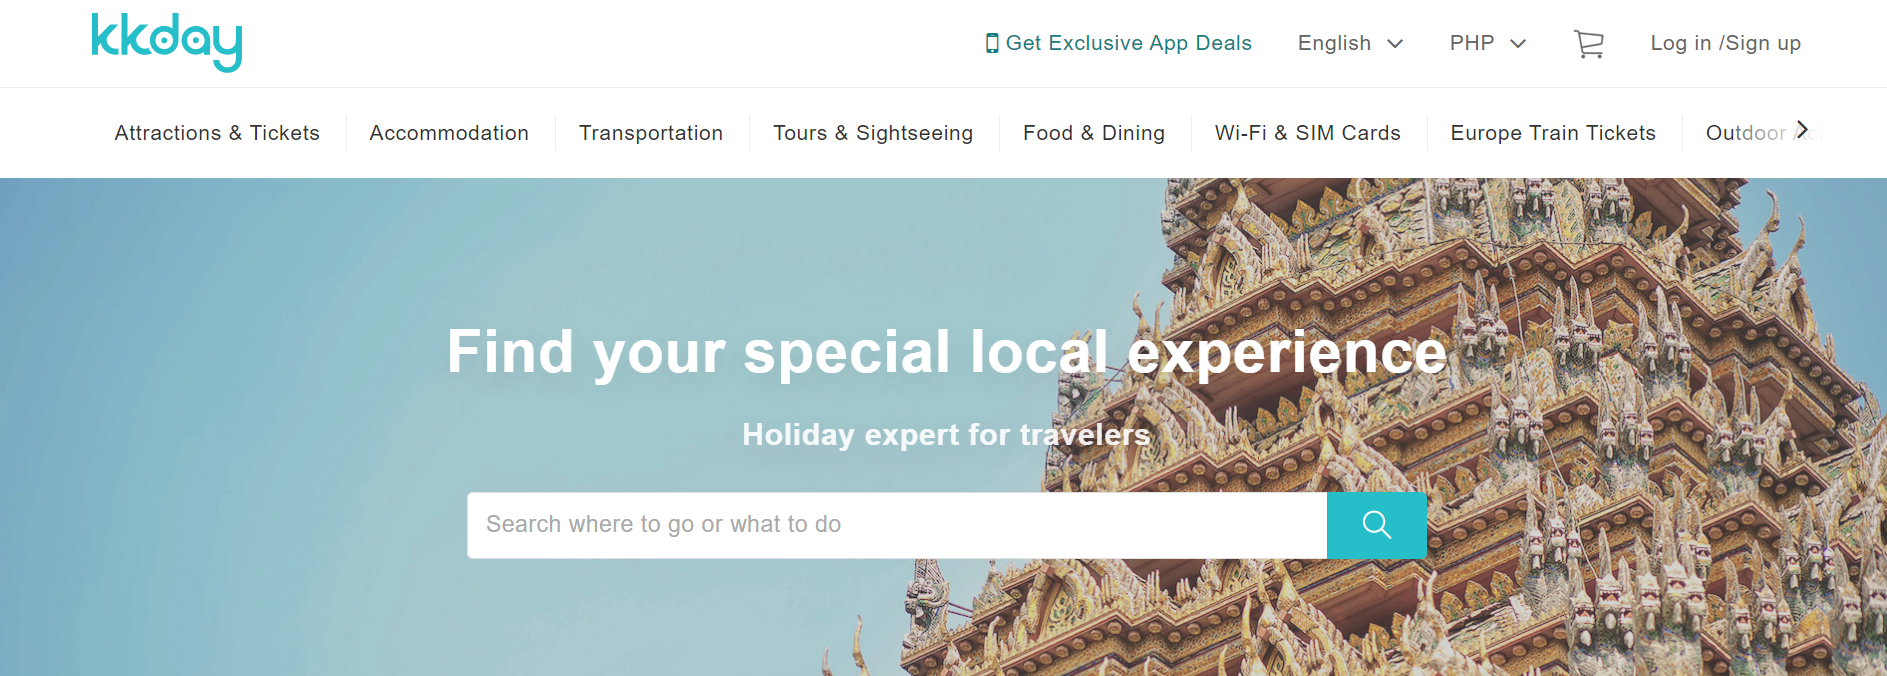 travel websites in the philippines - kkday